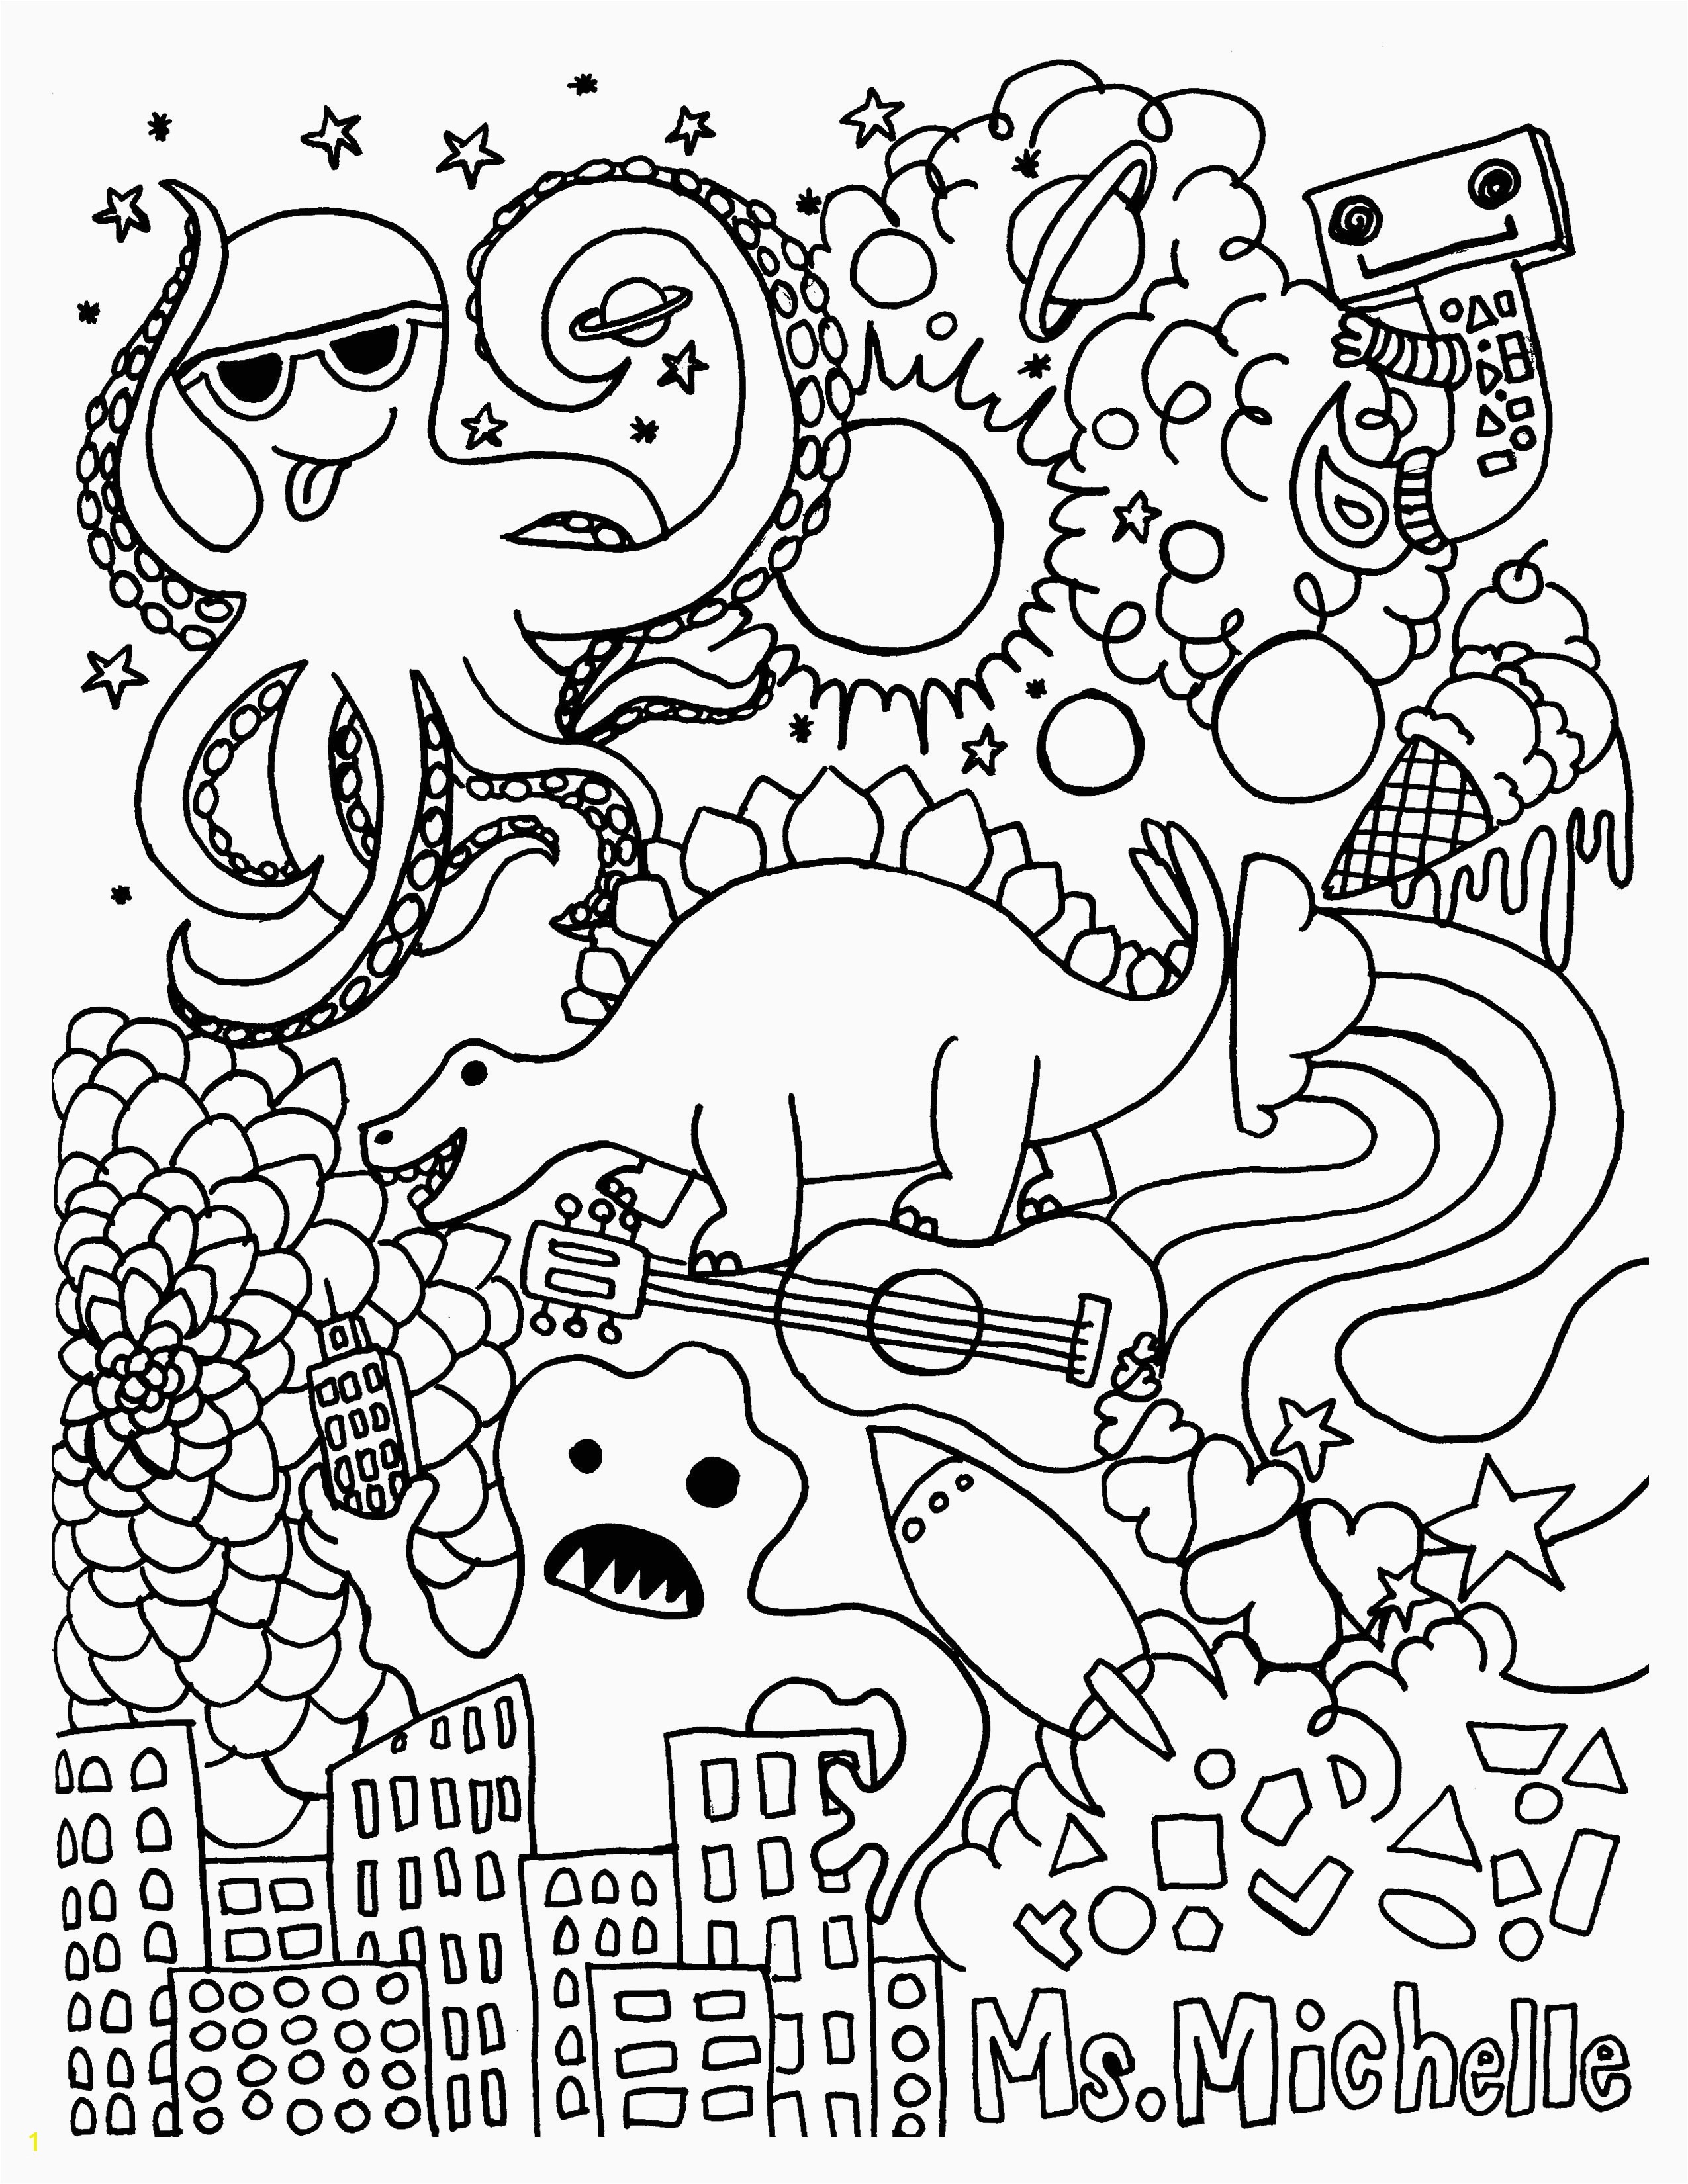 Witches Coloring Pages Printables Free Halloween Witch Coloring Page Free Coloring Pages for Halloween